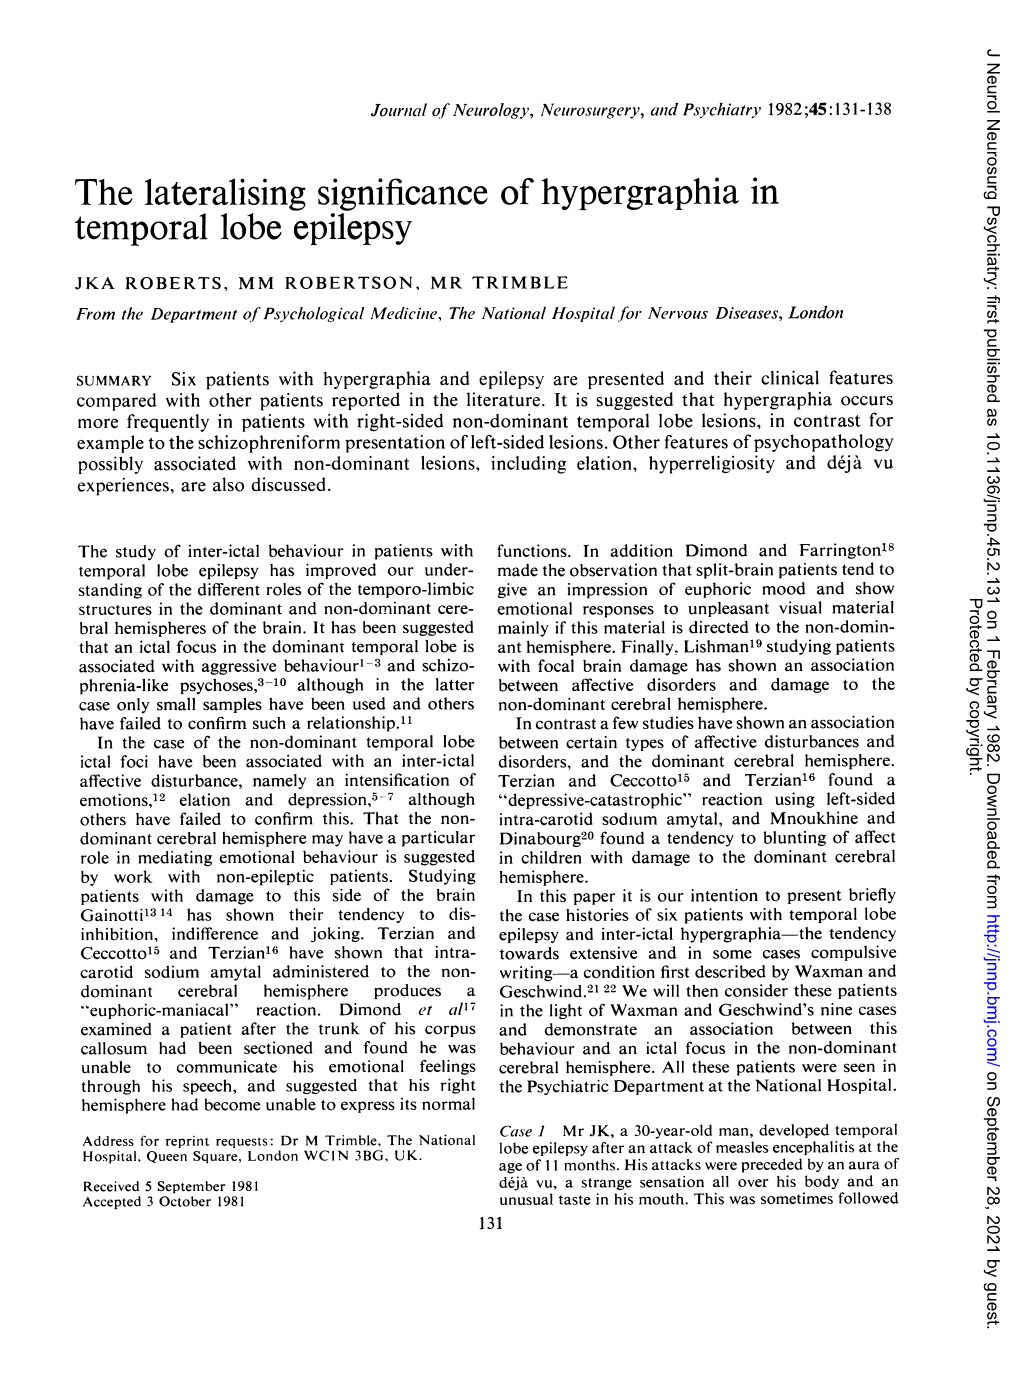 The Lateralising Significance of Hypergraphia in Temporal Lobe Epilepsy